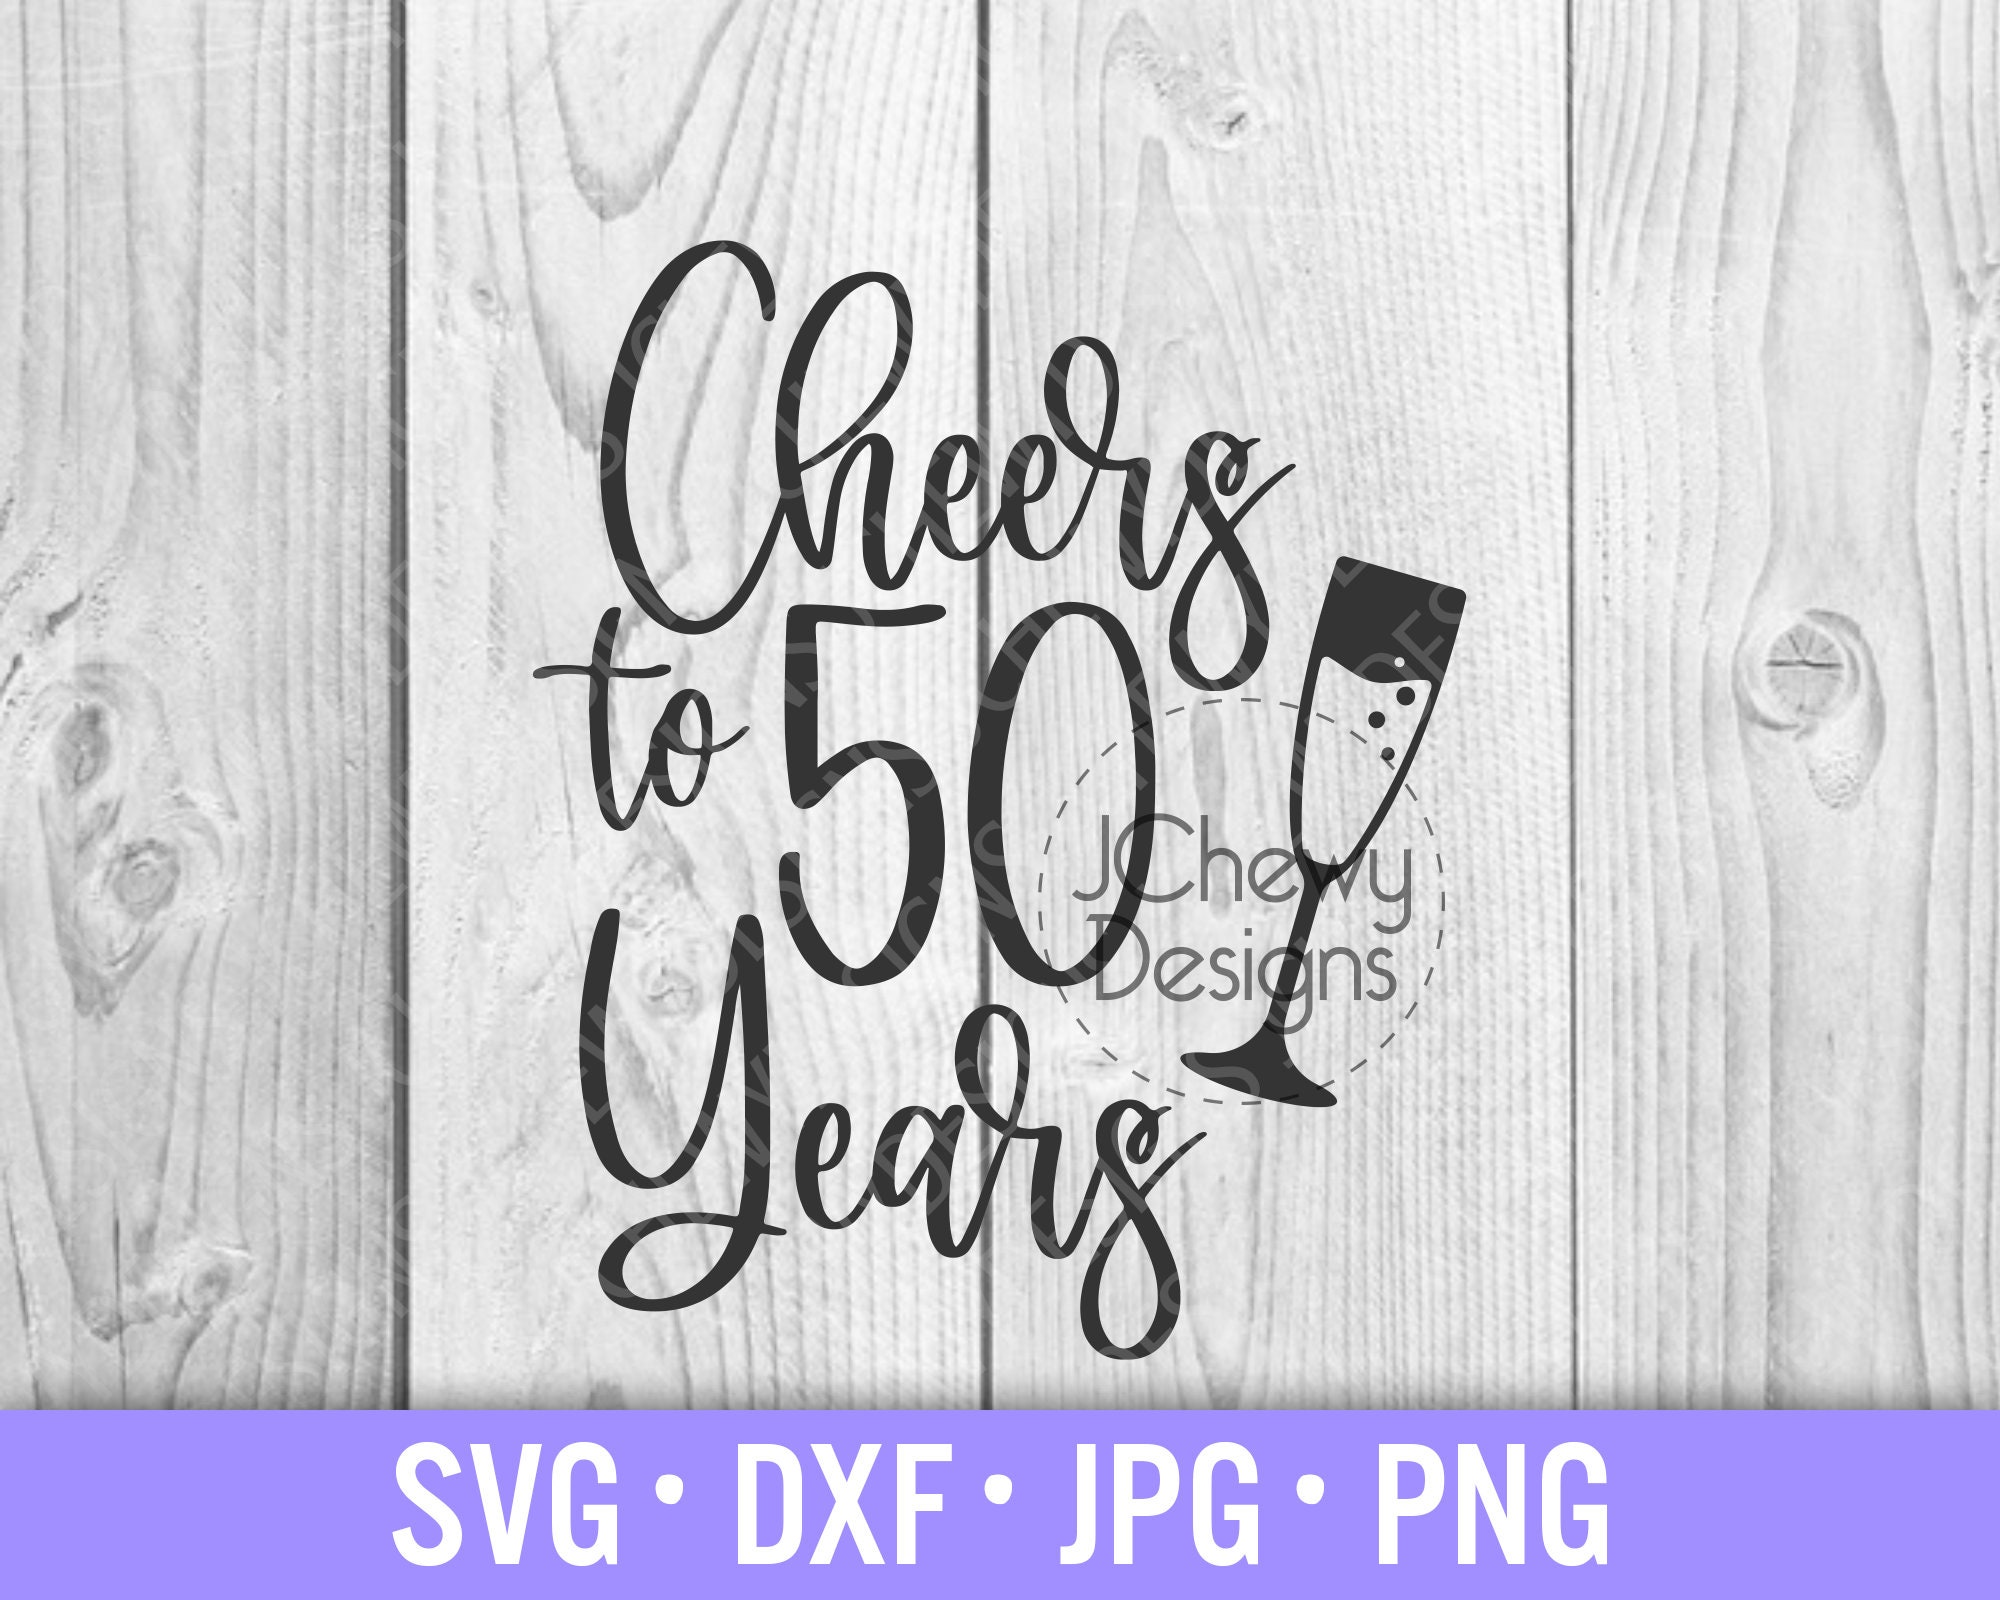 Cheers To 50 Years Svg 50th Birthday Svg 50 And Fabulous Etsy Canada